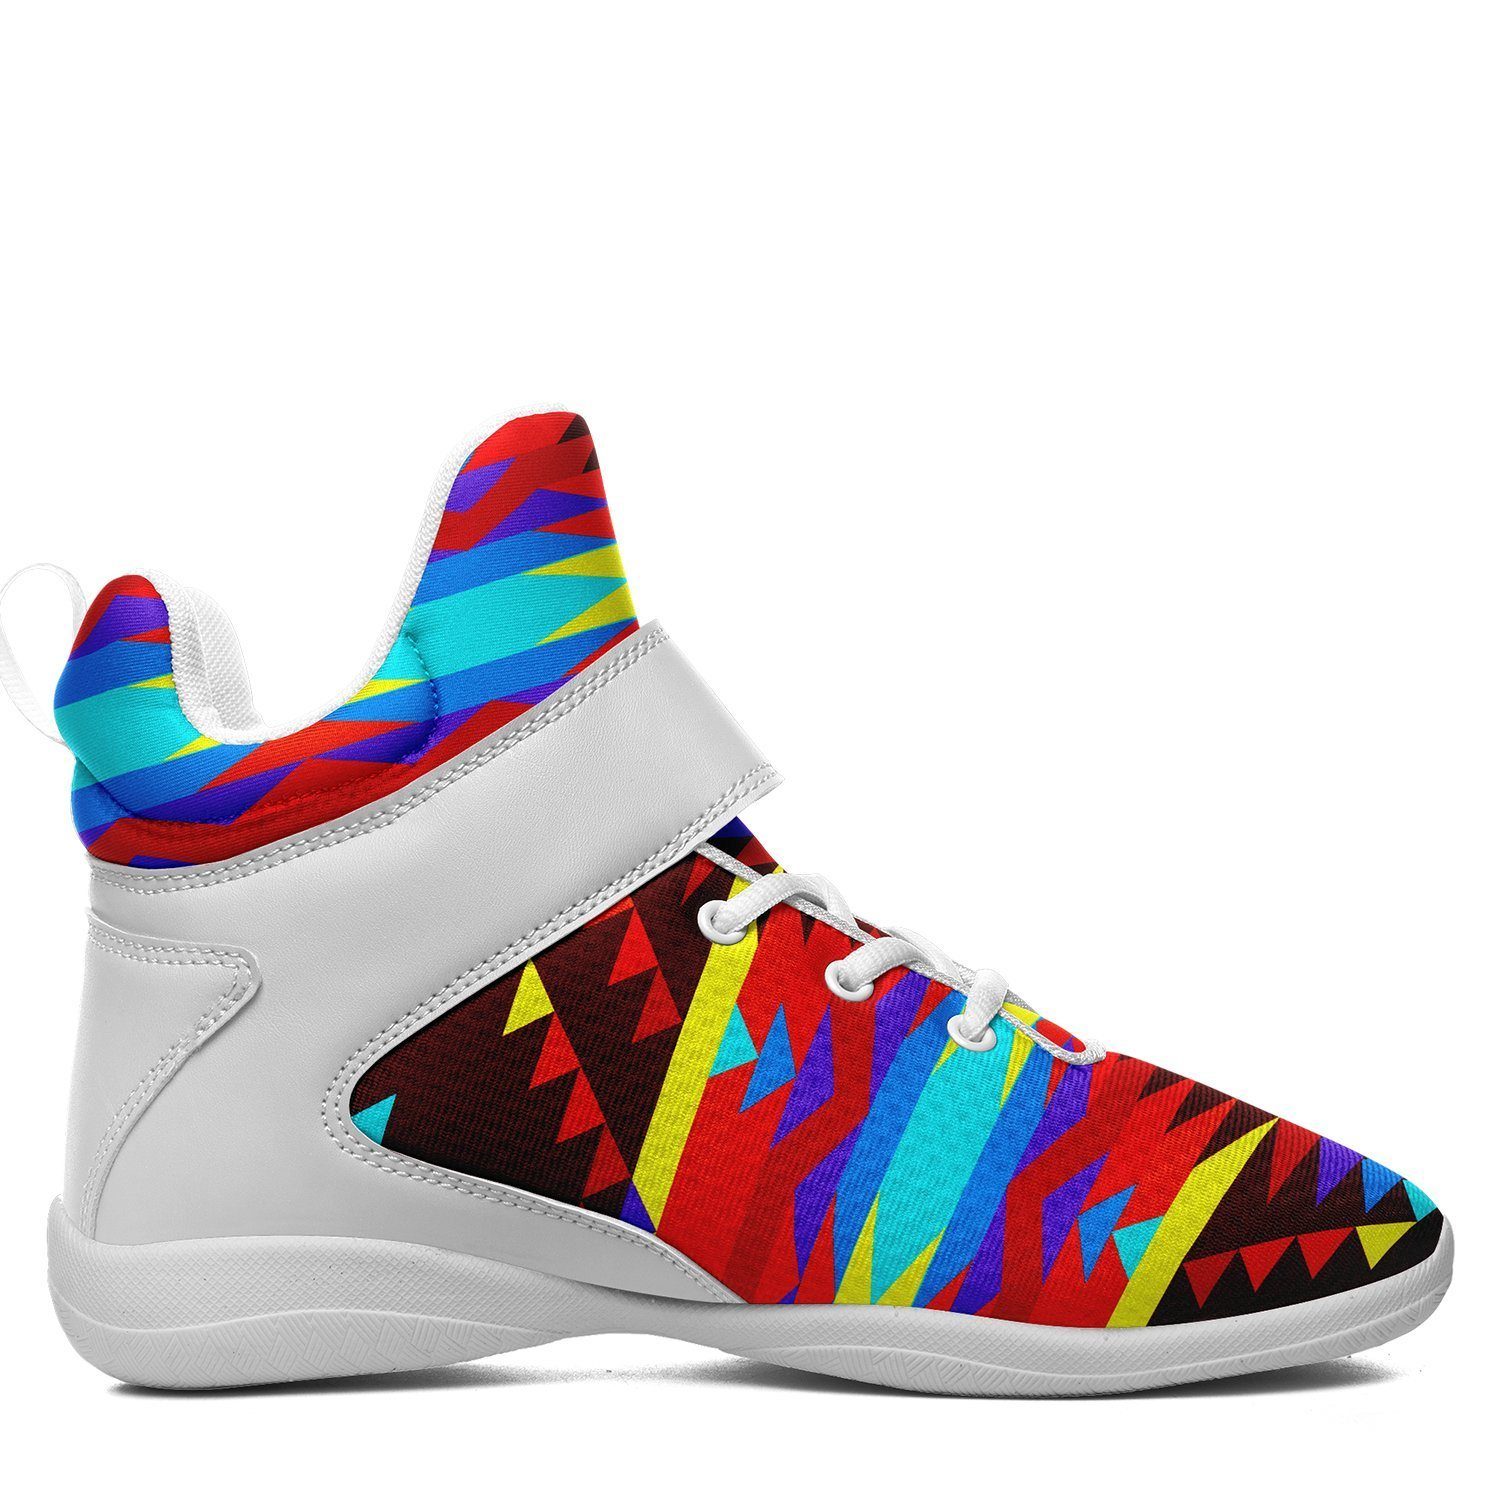 Visions of Lasting Peace Ipottaa Basketball / Sport High Top Shoes - White Sole 49 Dzine 